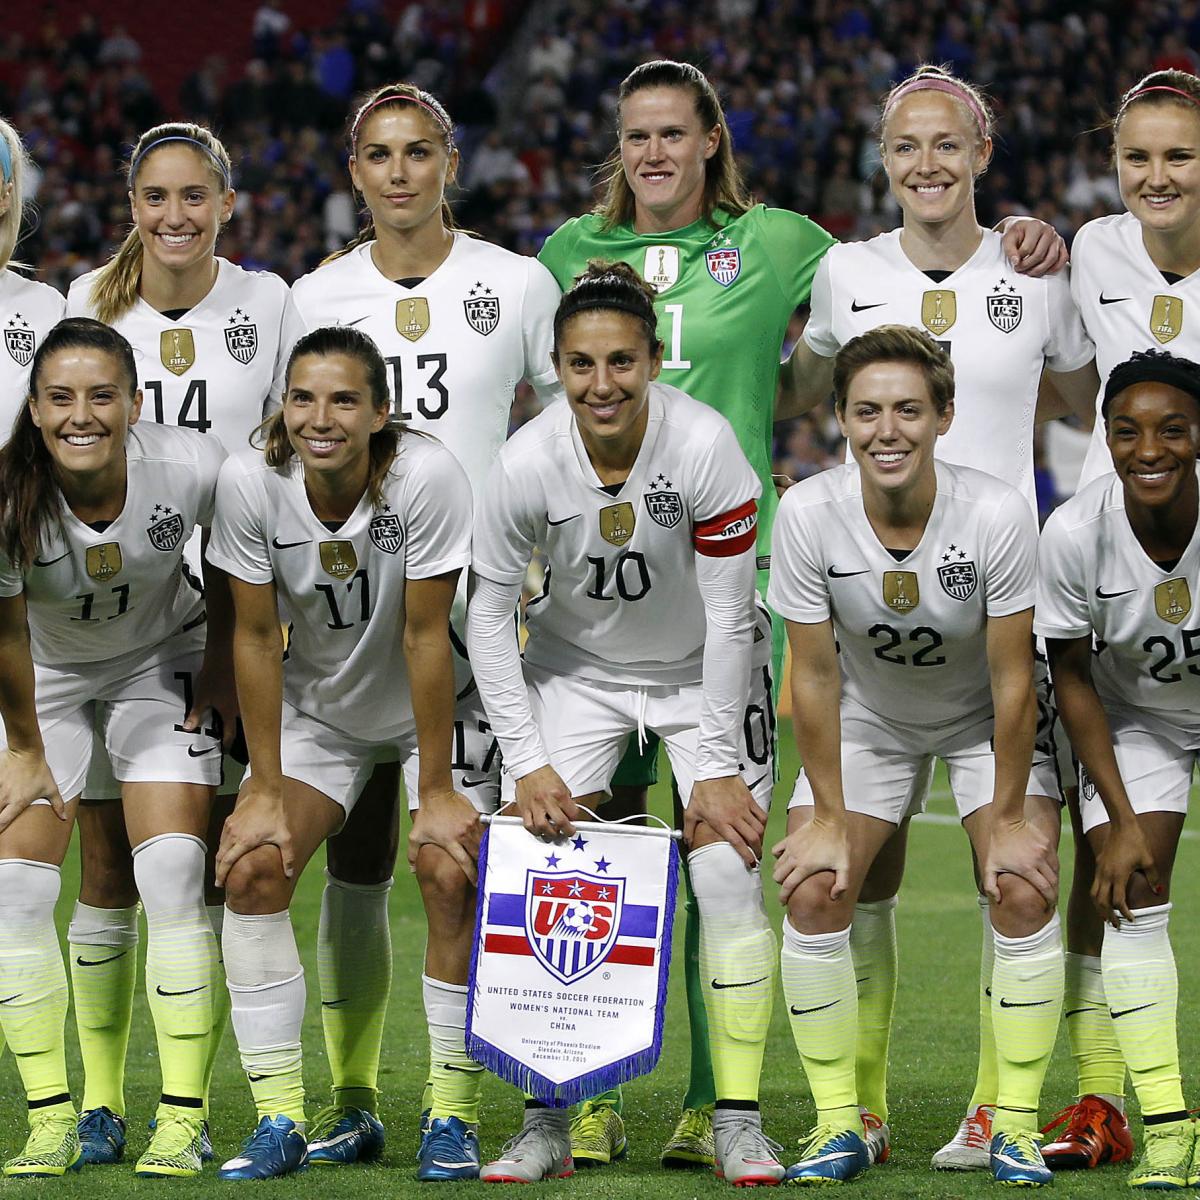 USA vs. Ireland Women's Soccer: Date, Time, TV Info and Live Stream for Friendly ...